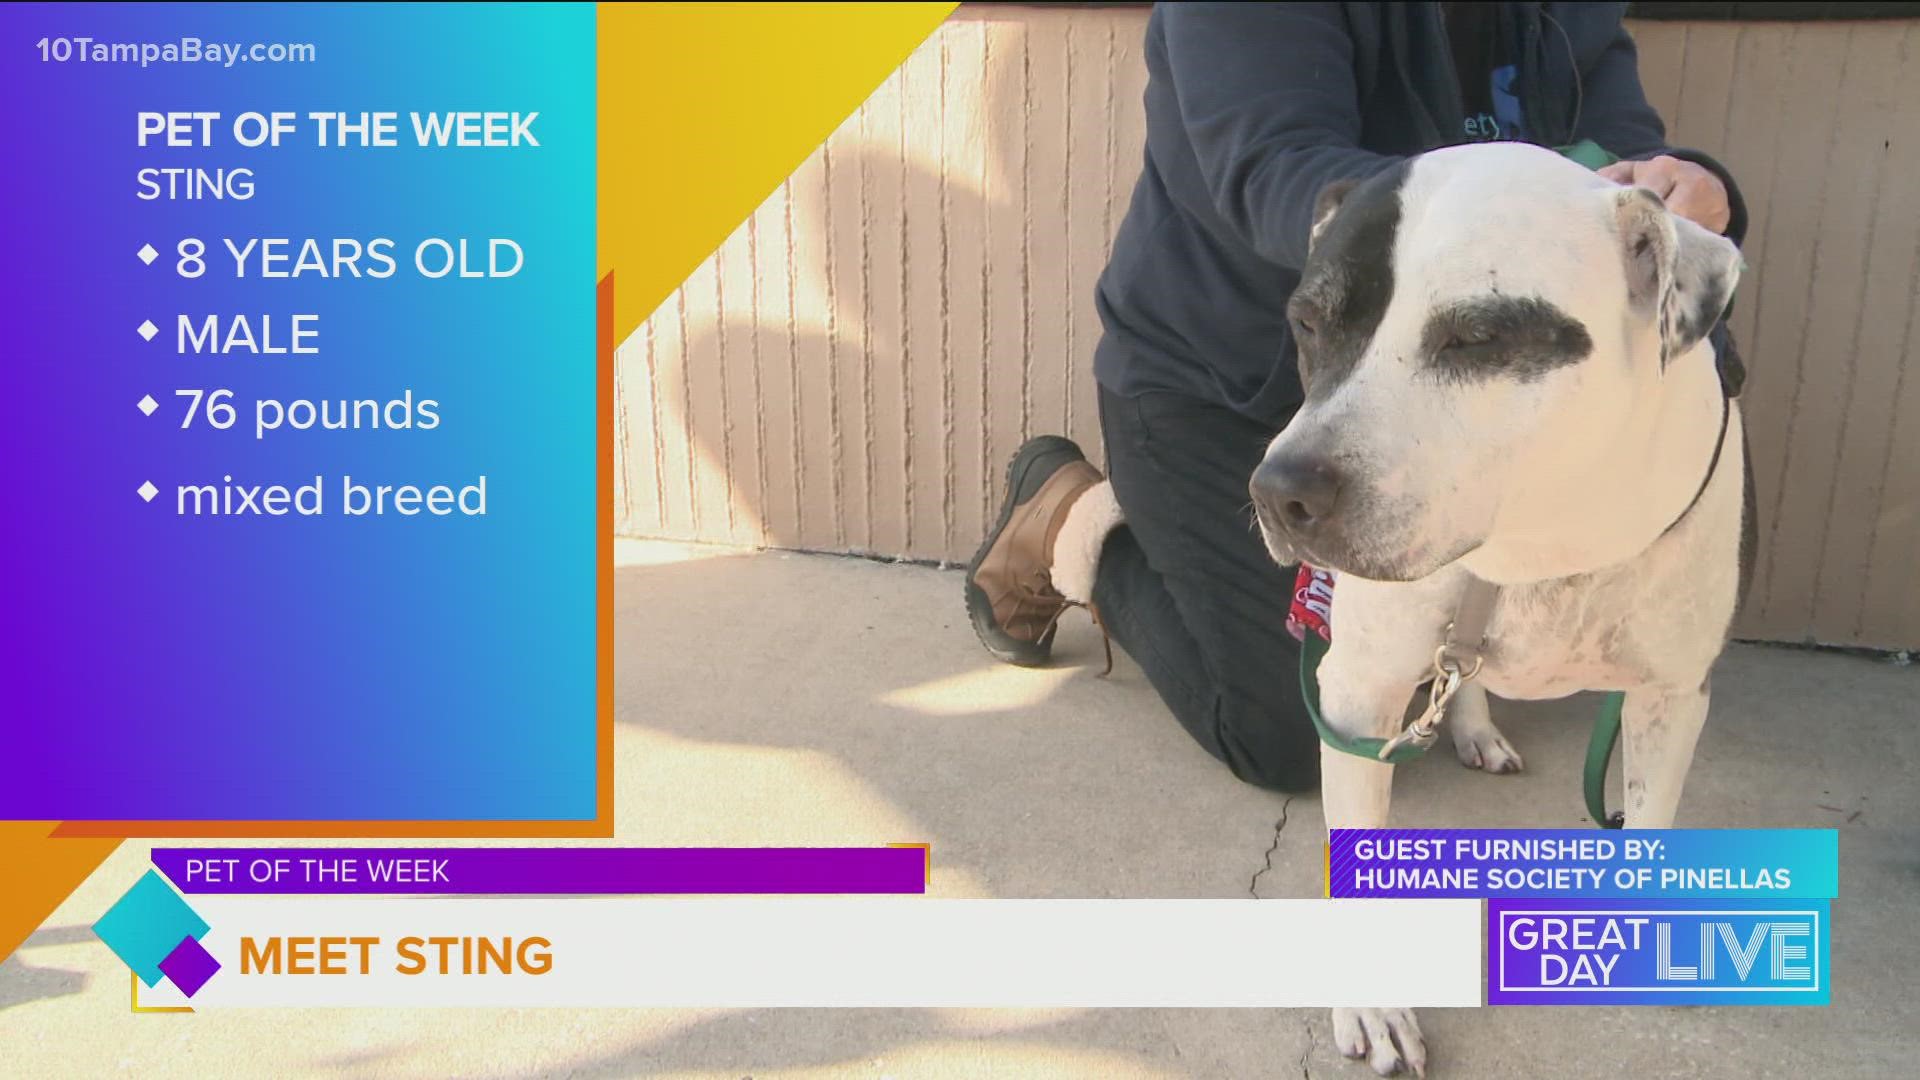 Meet Sting, our Pet of the Week